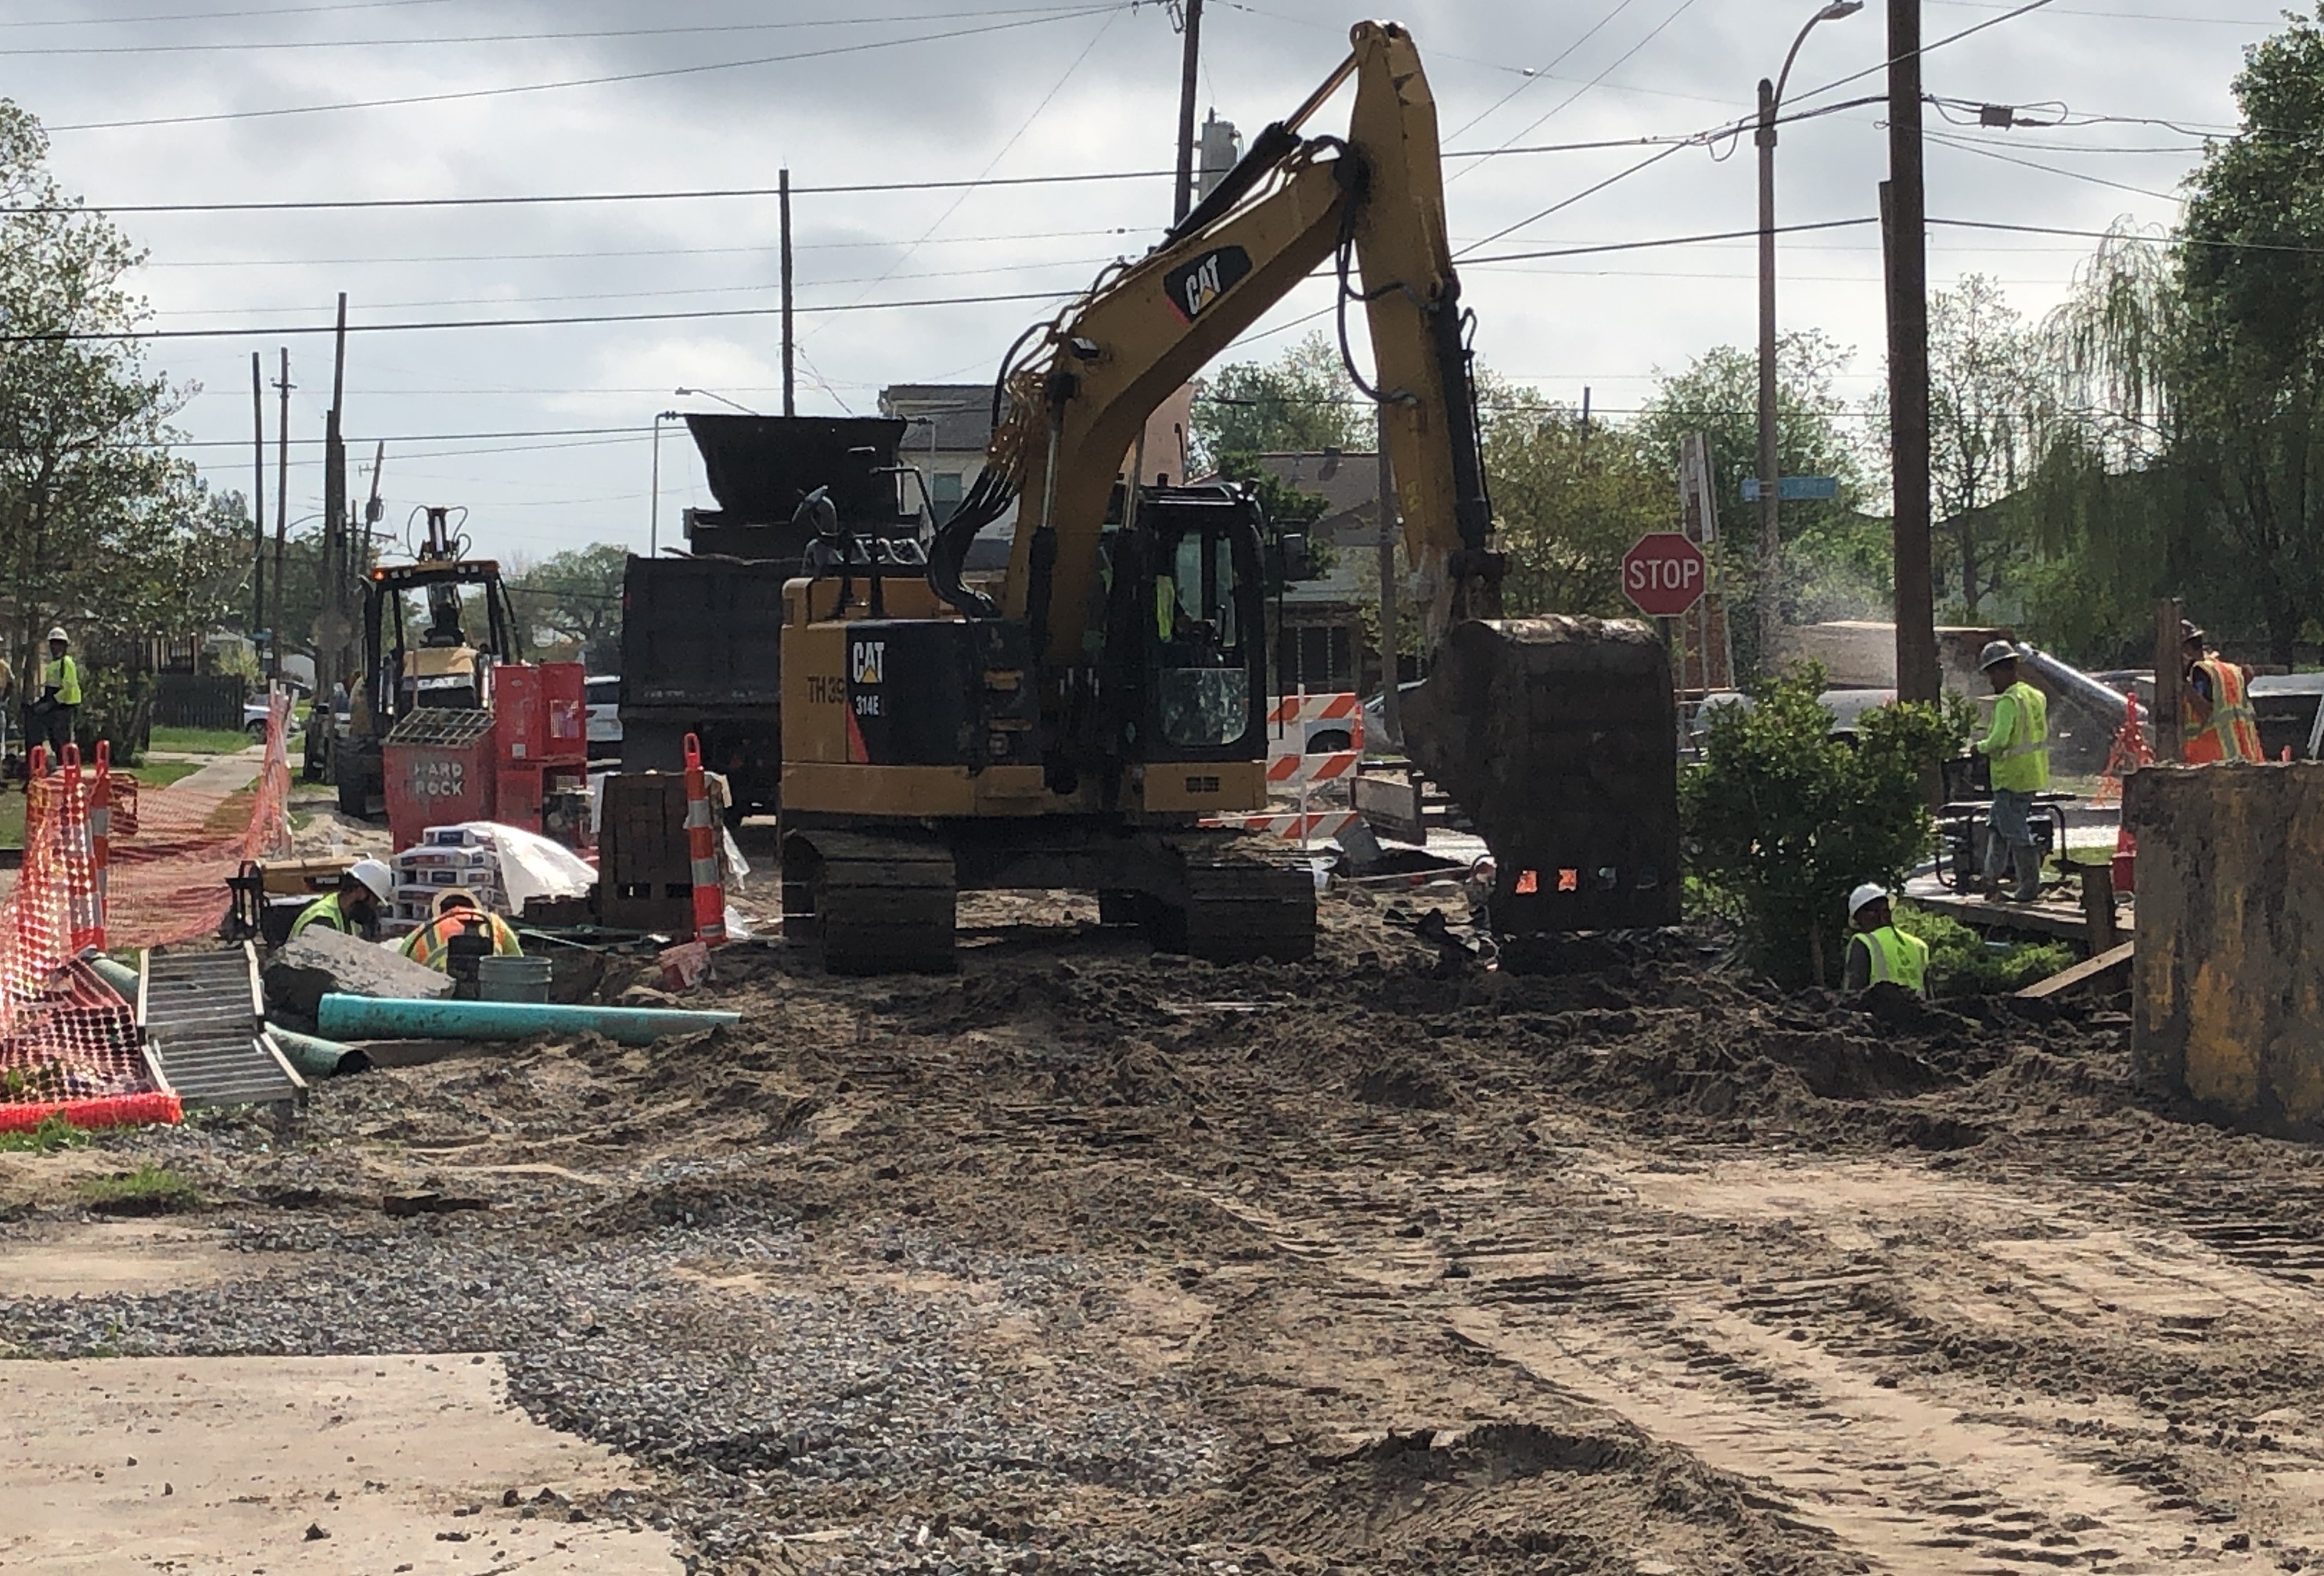 PAVEMENT RESTORATION, SEWER LINE WORK CONTINUES IN MILNEBURG GROUP B